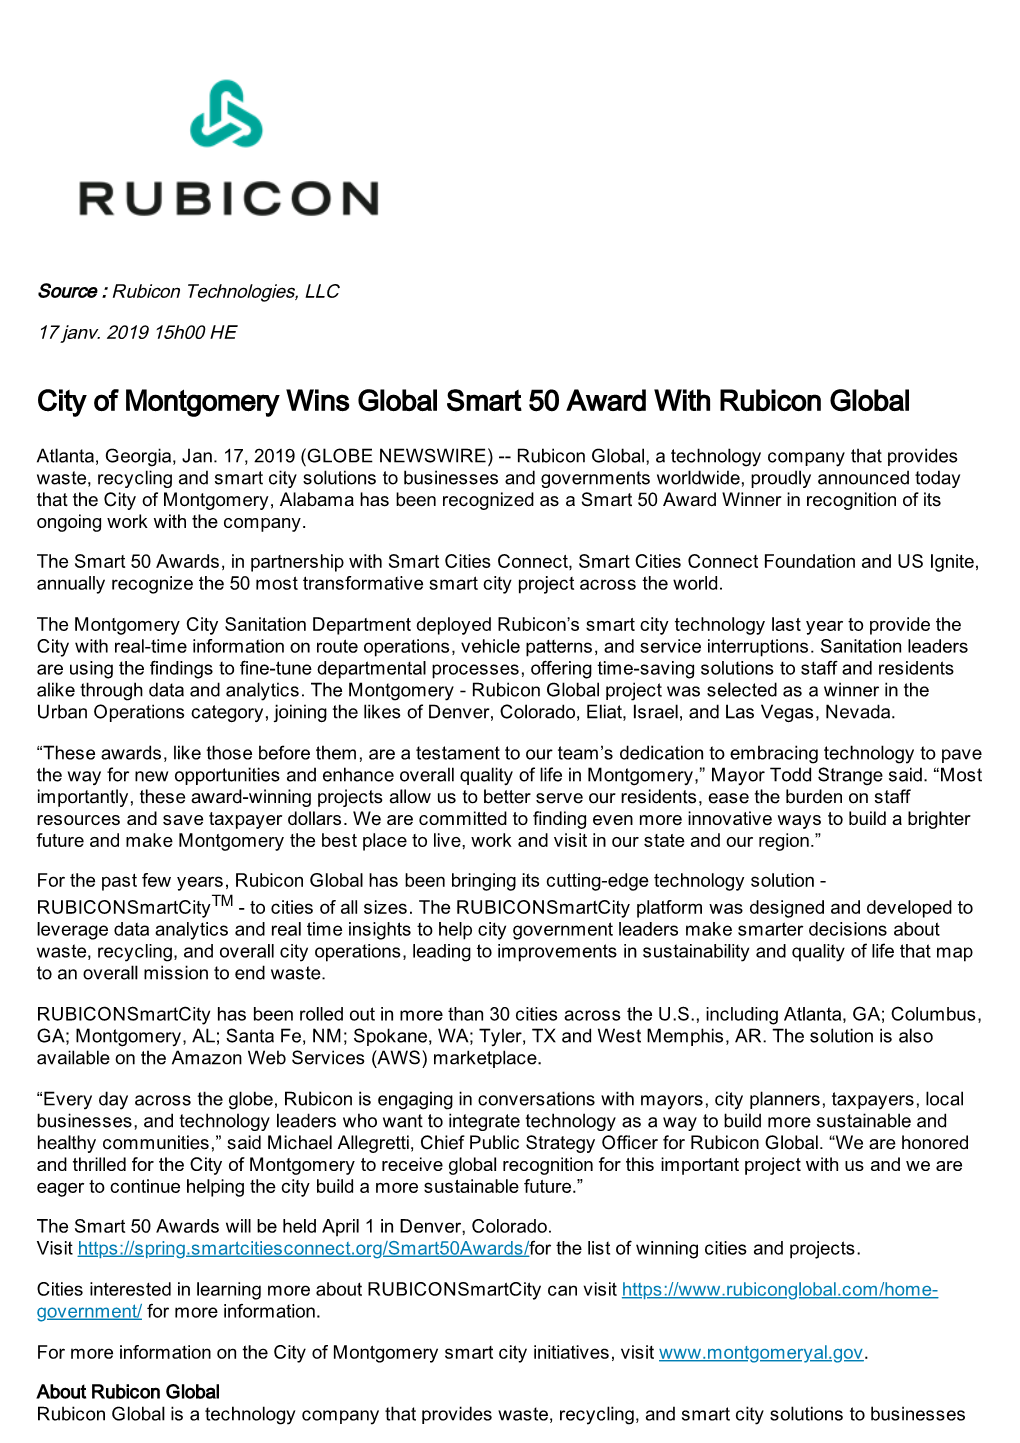 City of Montgomery Wins Global Smart 50 Award with Rubicon Global